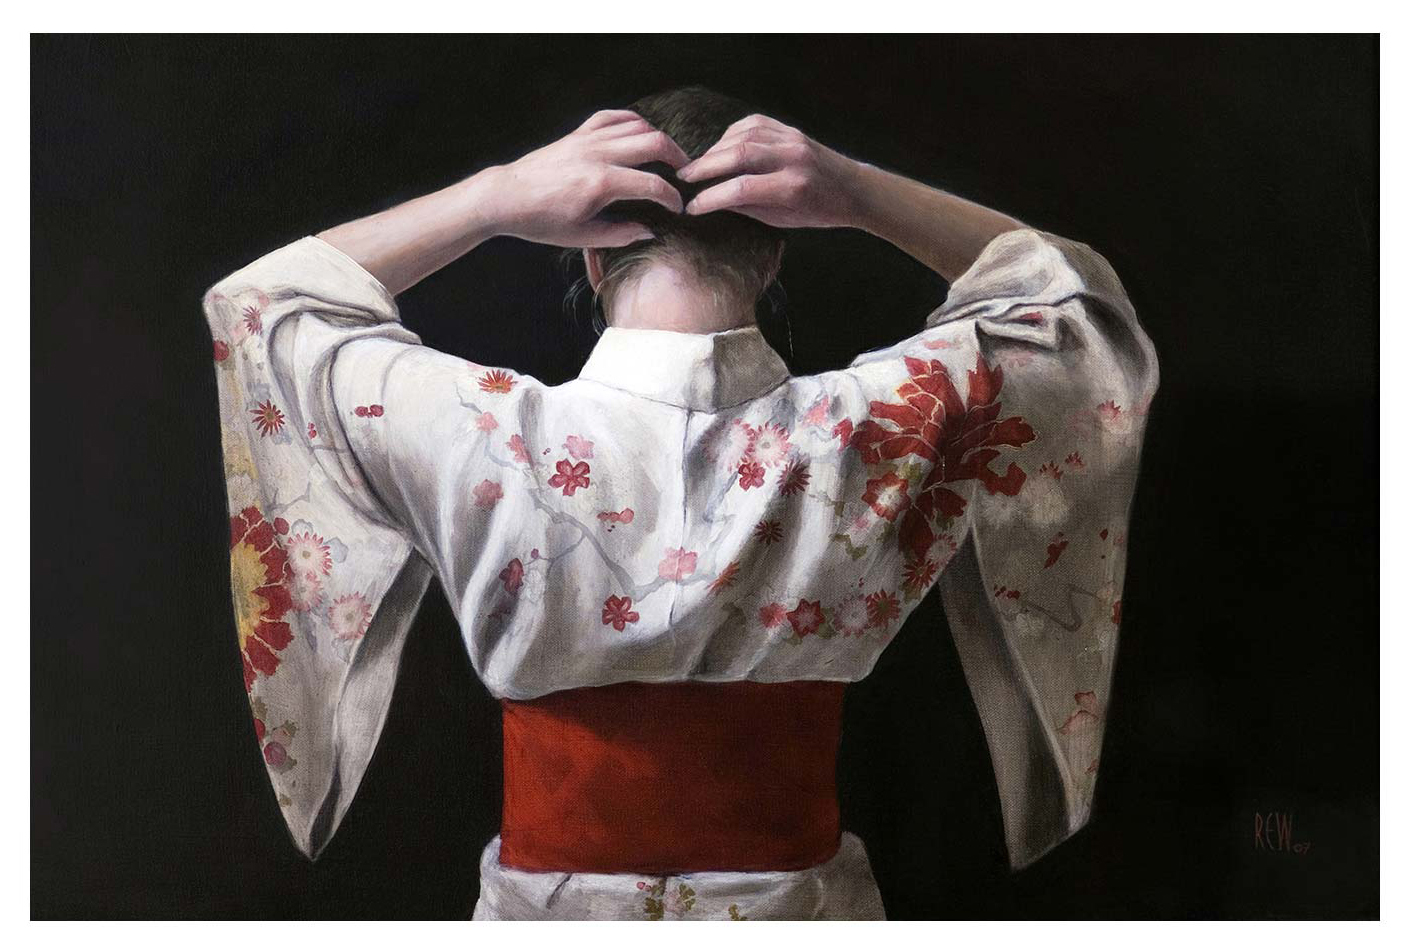 A person in a floral kimono facing away makes a heart shape with their hands above their head. by Stephanie rue